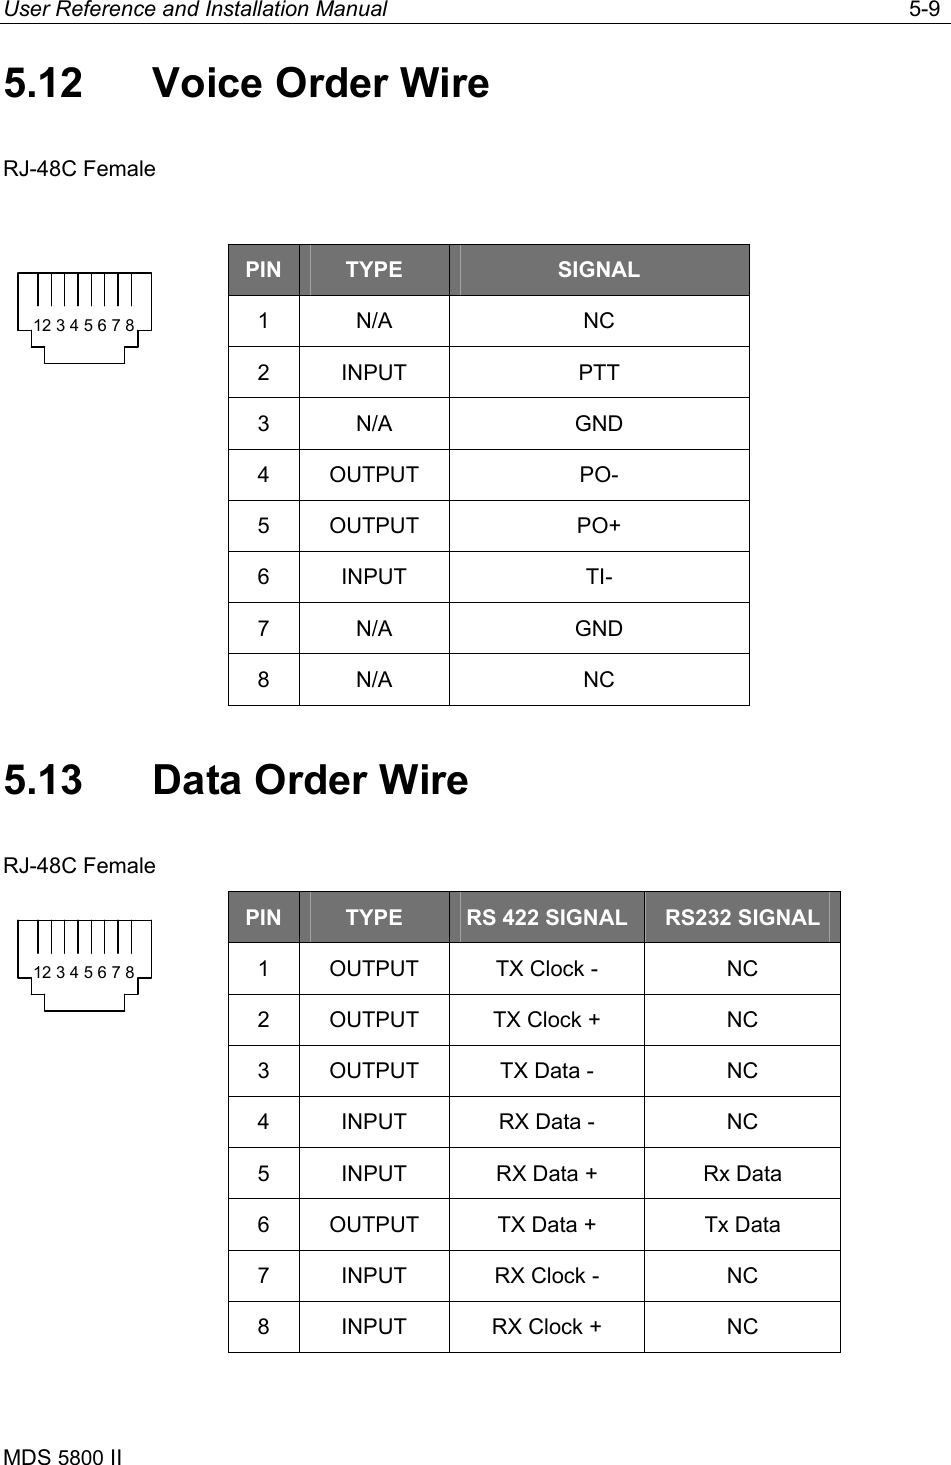 User Reference and Installation Manual   5-9 MDS 5800 II      5.12  Voice Order Wire RJ-48C Female  PIN  TYPE  SIGNAL 1 N/A  NC 2 INPUT  PTT 3 N/A  GND 4 OUTPUT  PO- 5 OUTPUT  PO+ 6 INPUT  TI- 7 N/A  GND 8 N/A  NC 5.13  Data Order Wire RJ-48C Female PIN  TYPE  RS 422 SIGNAL  RS232 SIGNAL 1  OUTPUT  TX Clock -  NC 2  OUTPUT  TX Clock +  NC 3  OUTPUT  TX Data -  NC 4  INPUT  RX Data -  NC 5  INPUT  RX Data +  Rx Data 6  OUTPUT  TX Data +  Tx Data 7  INPUT  RX Clock -  NC 8  INPUT  RX Clock +  NC 12 3 4 5 6 7 8 12 3 4 5 6 7 8 